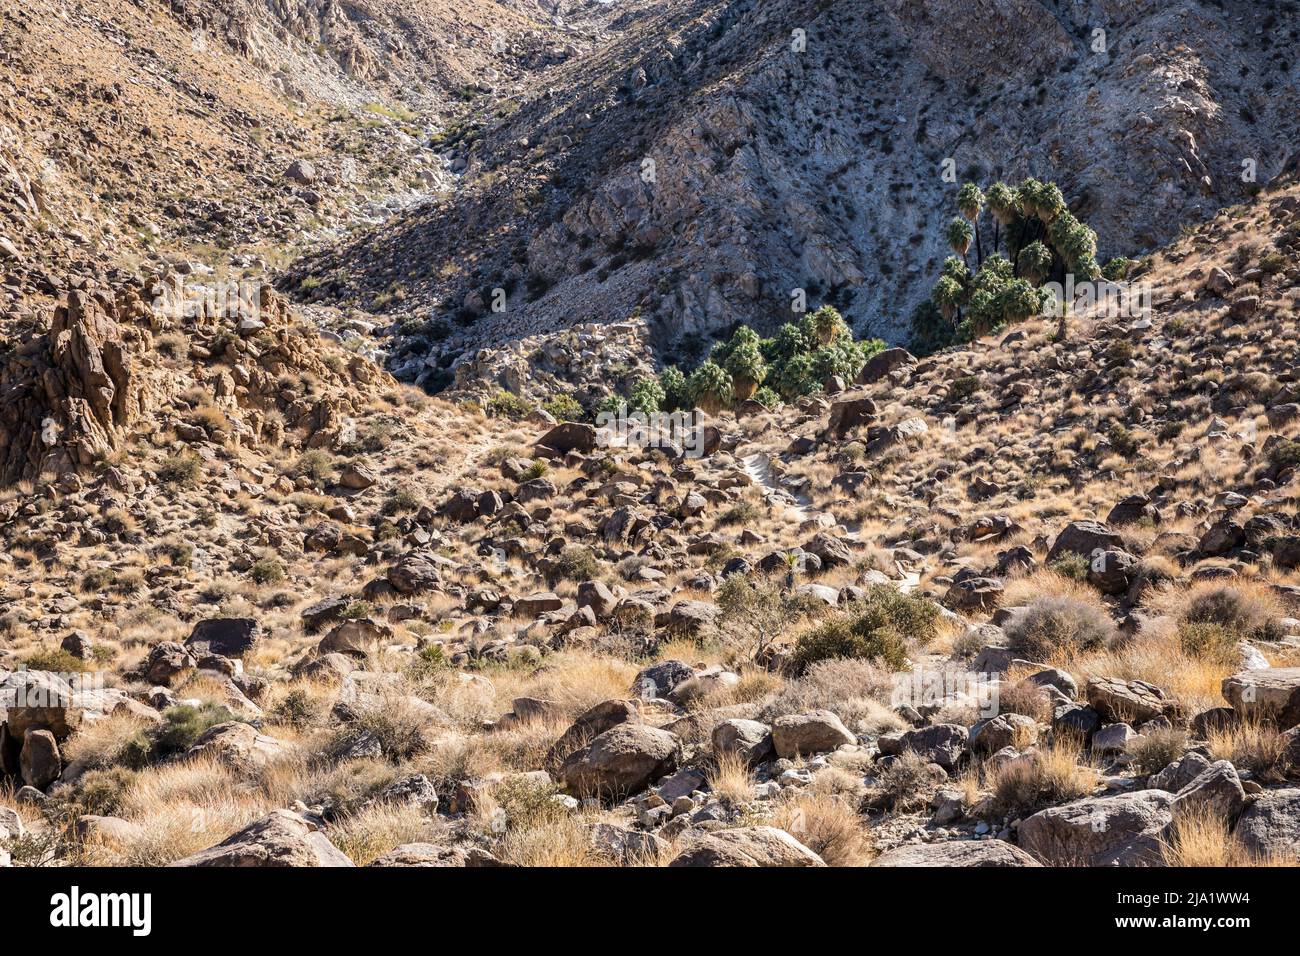 On the trail to Fortynine Palms Desert Oasis in Joshua Tree National Park. Stock Photo